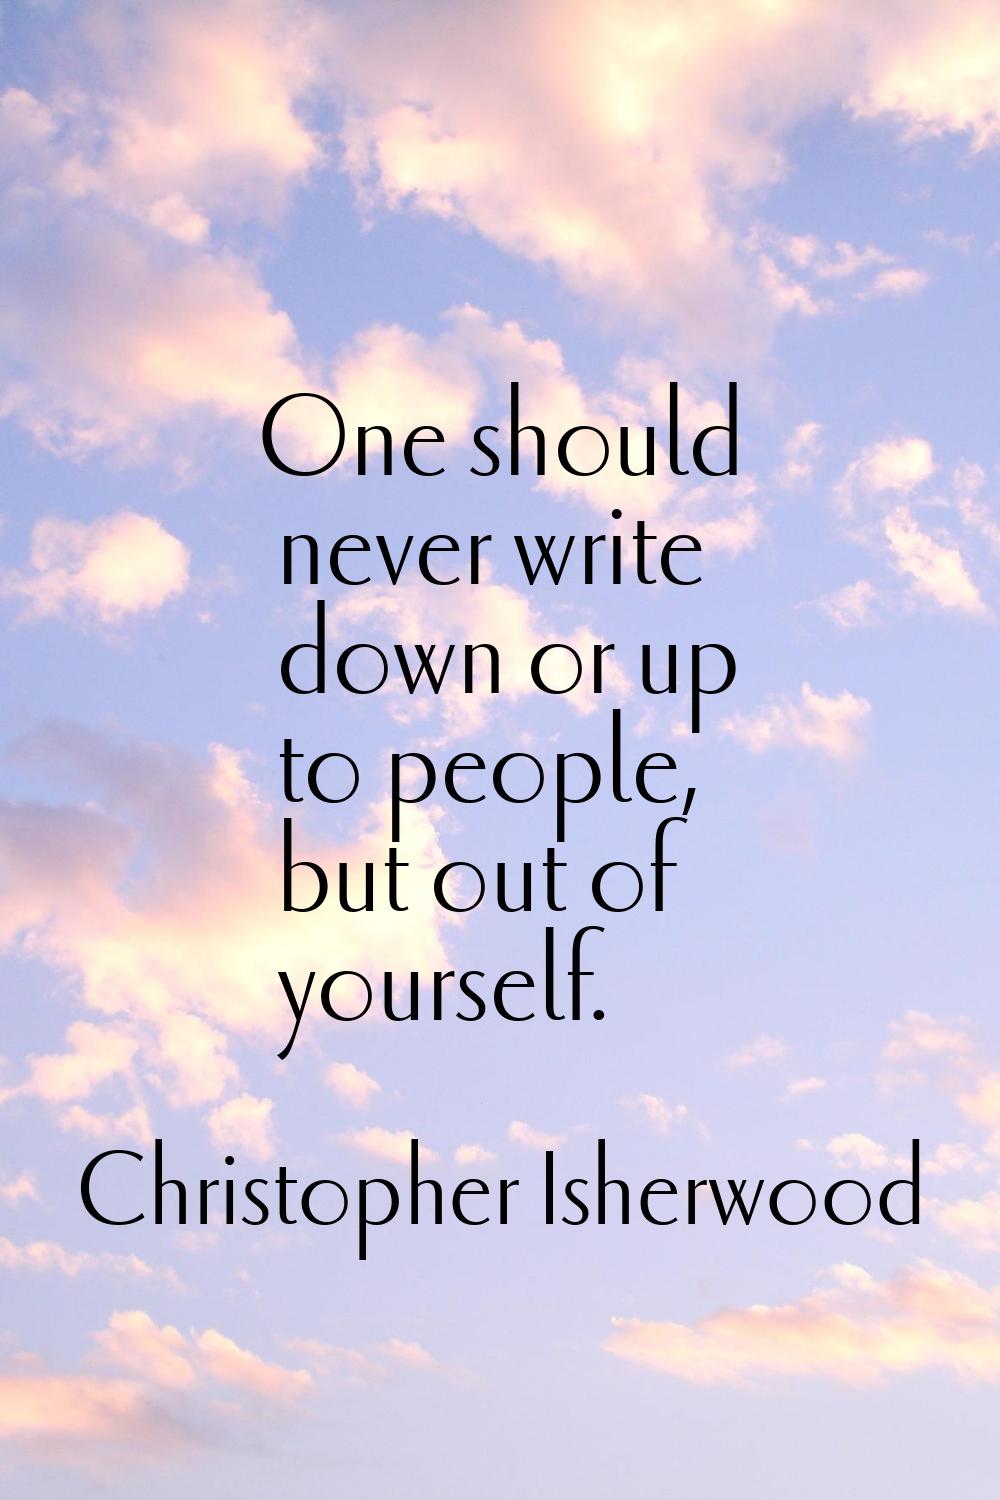 One should never write down or up to people, but out of yourself.